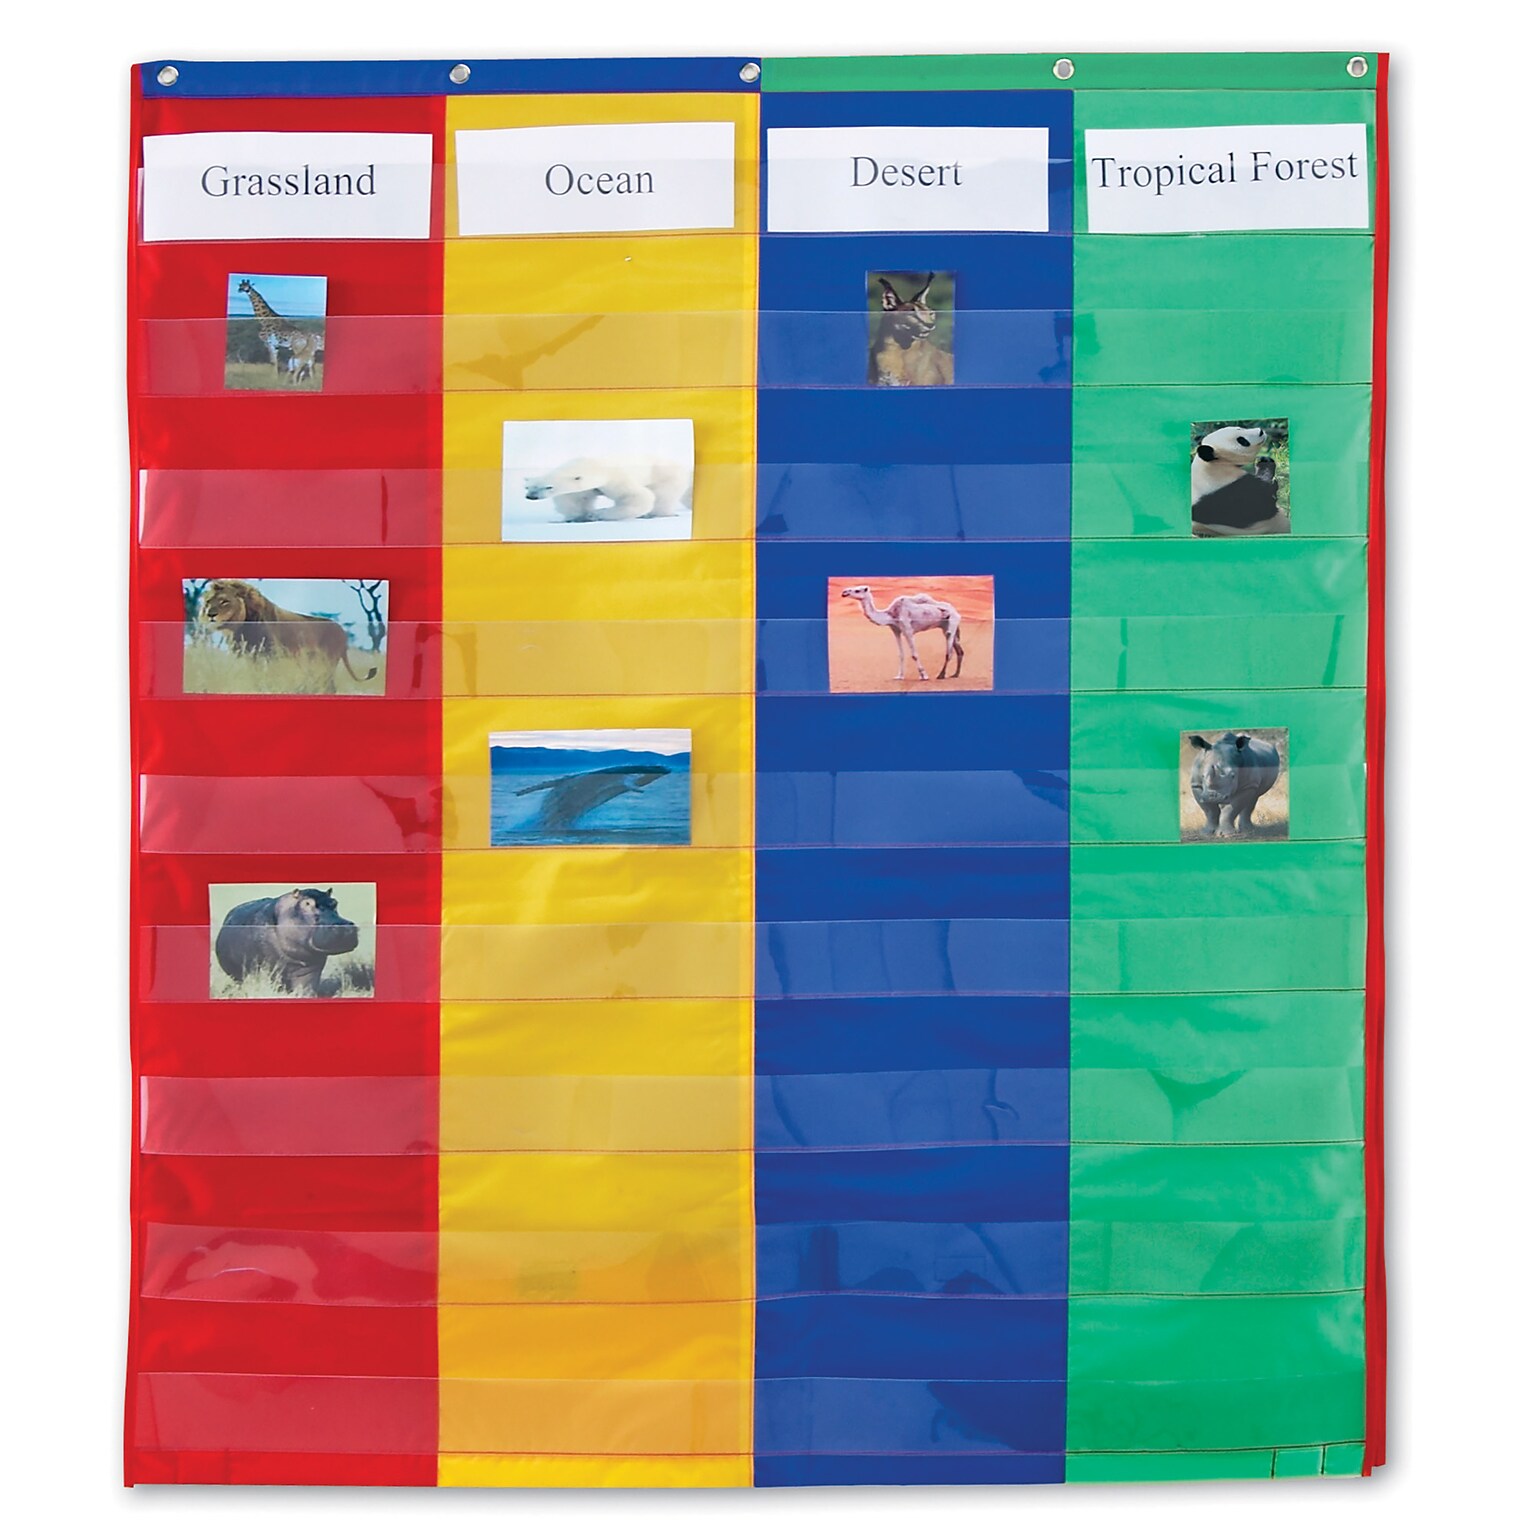 Learning Resources Pocket Charts, 2 & 4 Column Double-Sided (LER2382)